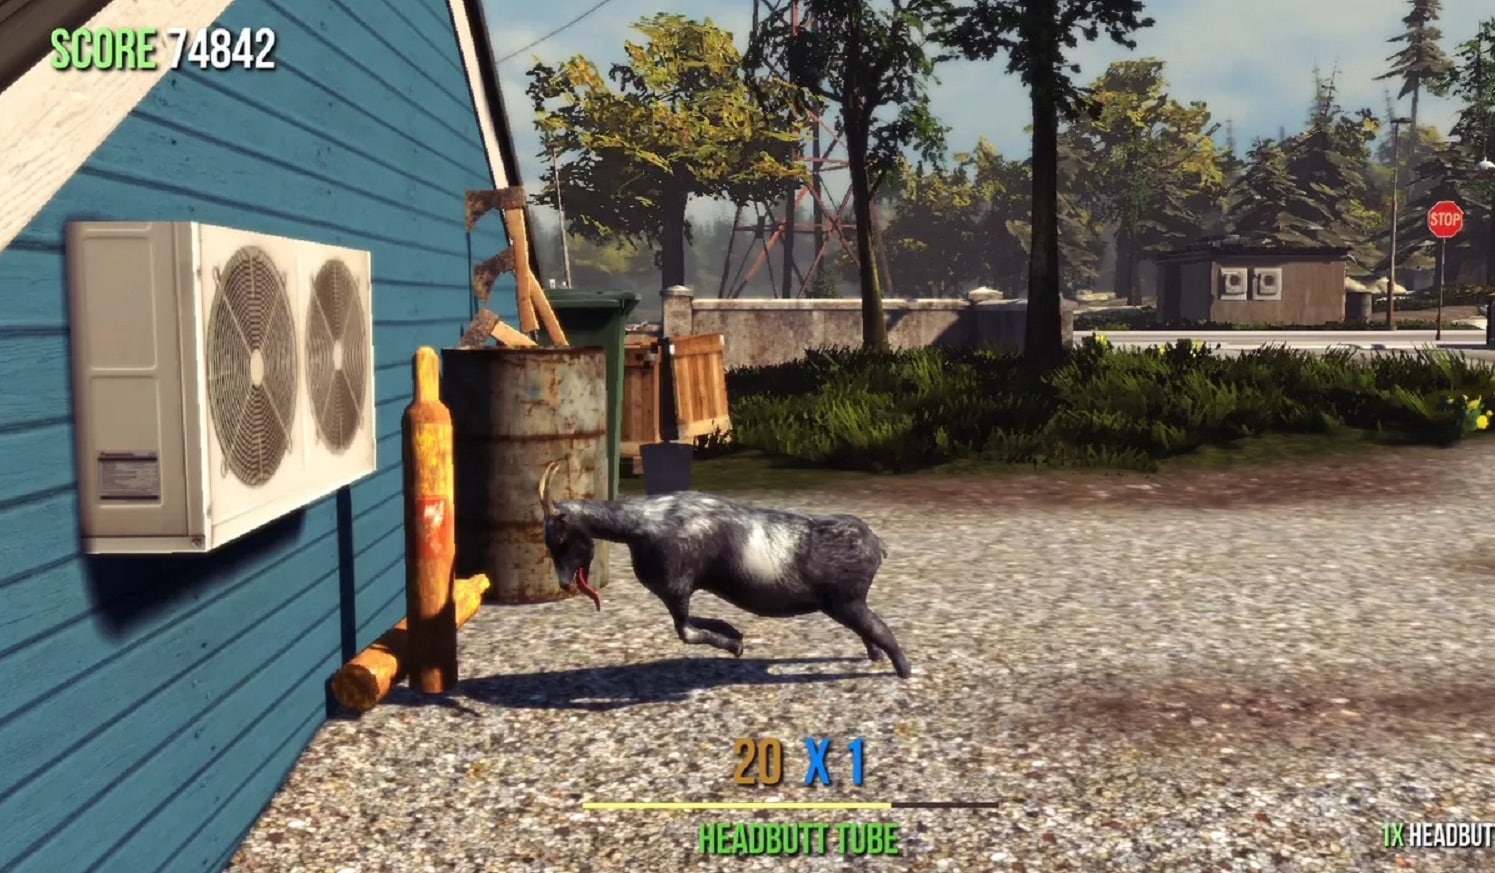 Can You Play Goat Simulator Online Multiplayer Goat Simulator Guide Pc Playstation 3 Playstation 4 Xbox 360 And Xbox One Family Review